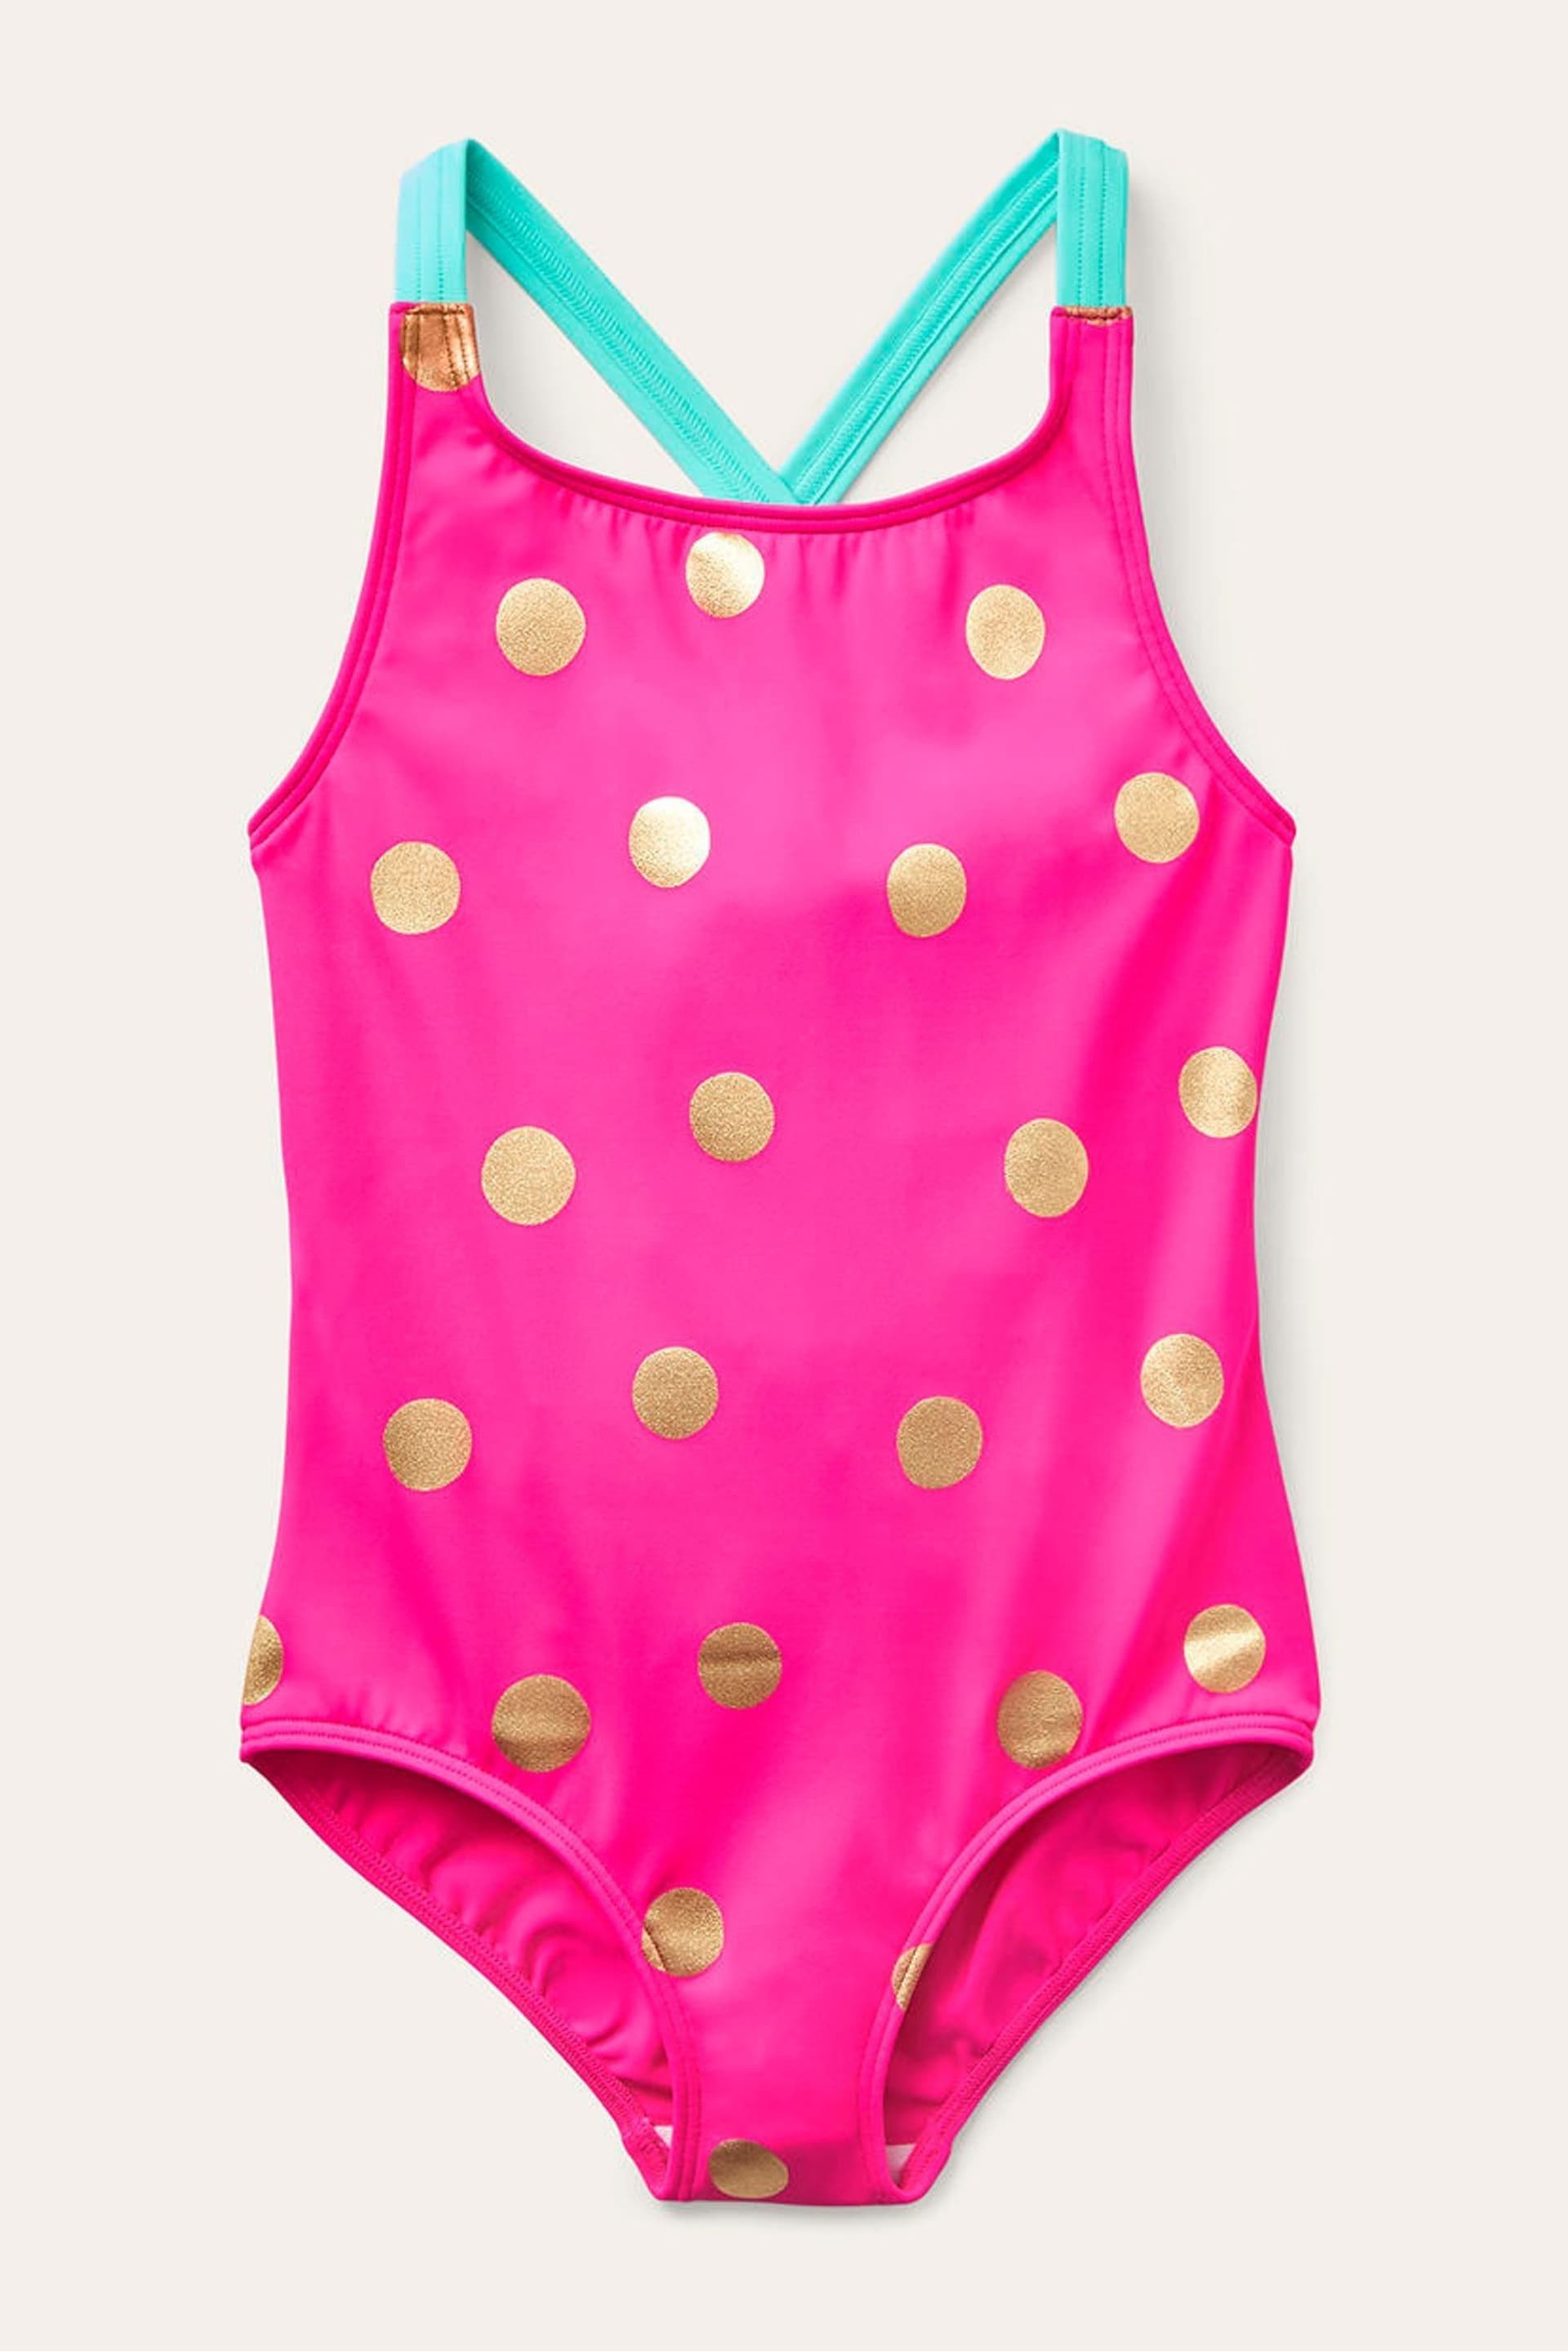 Boden Pink Cross-Back Printed Swimsuit - Image 1 of 3